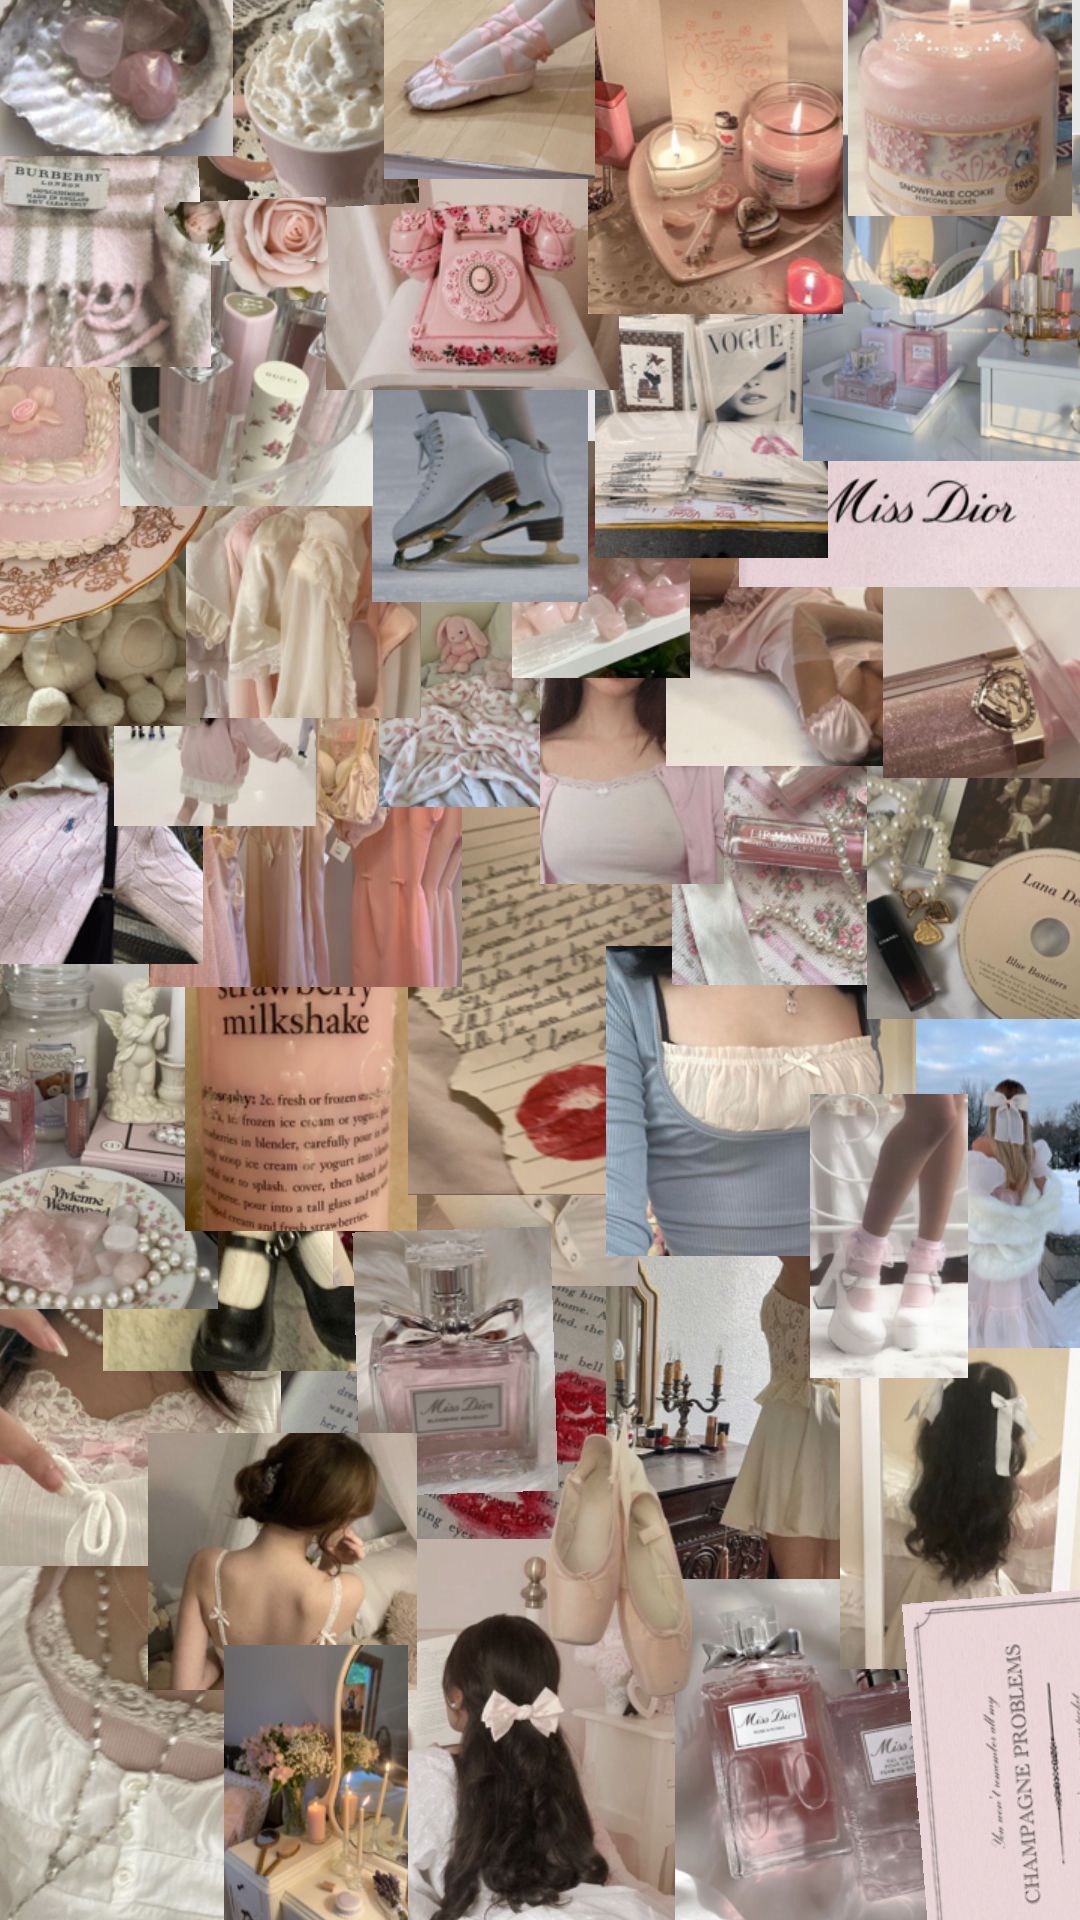 Aesthetic collage of vintage pink beauty products, fashion, and decor - Vogue